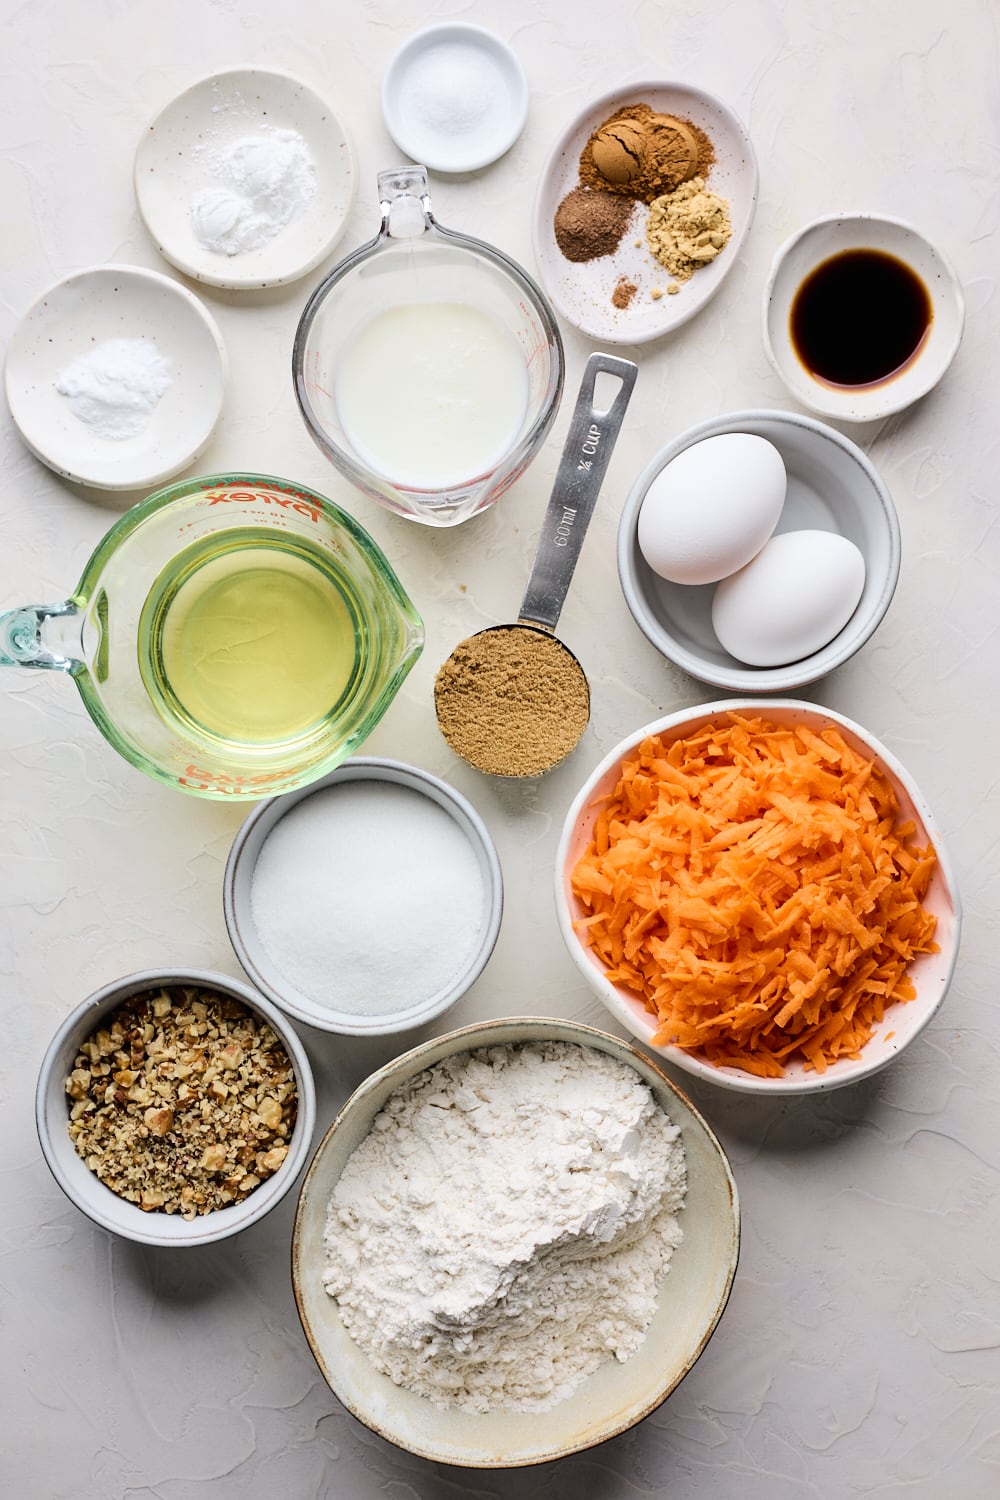 Ingredients for a moist and delicious carrot loaf cake